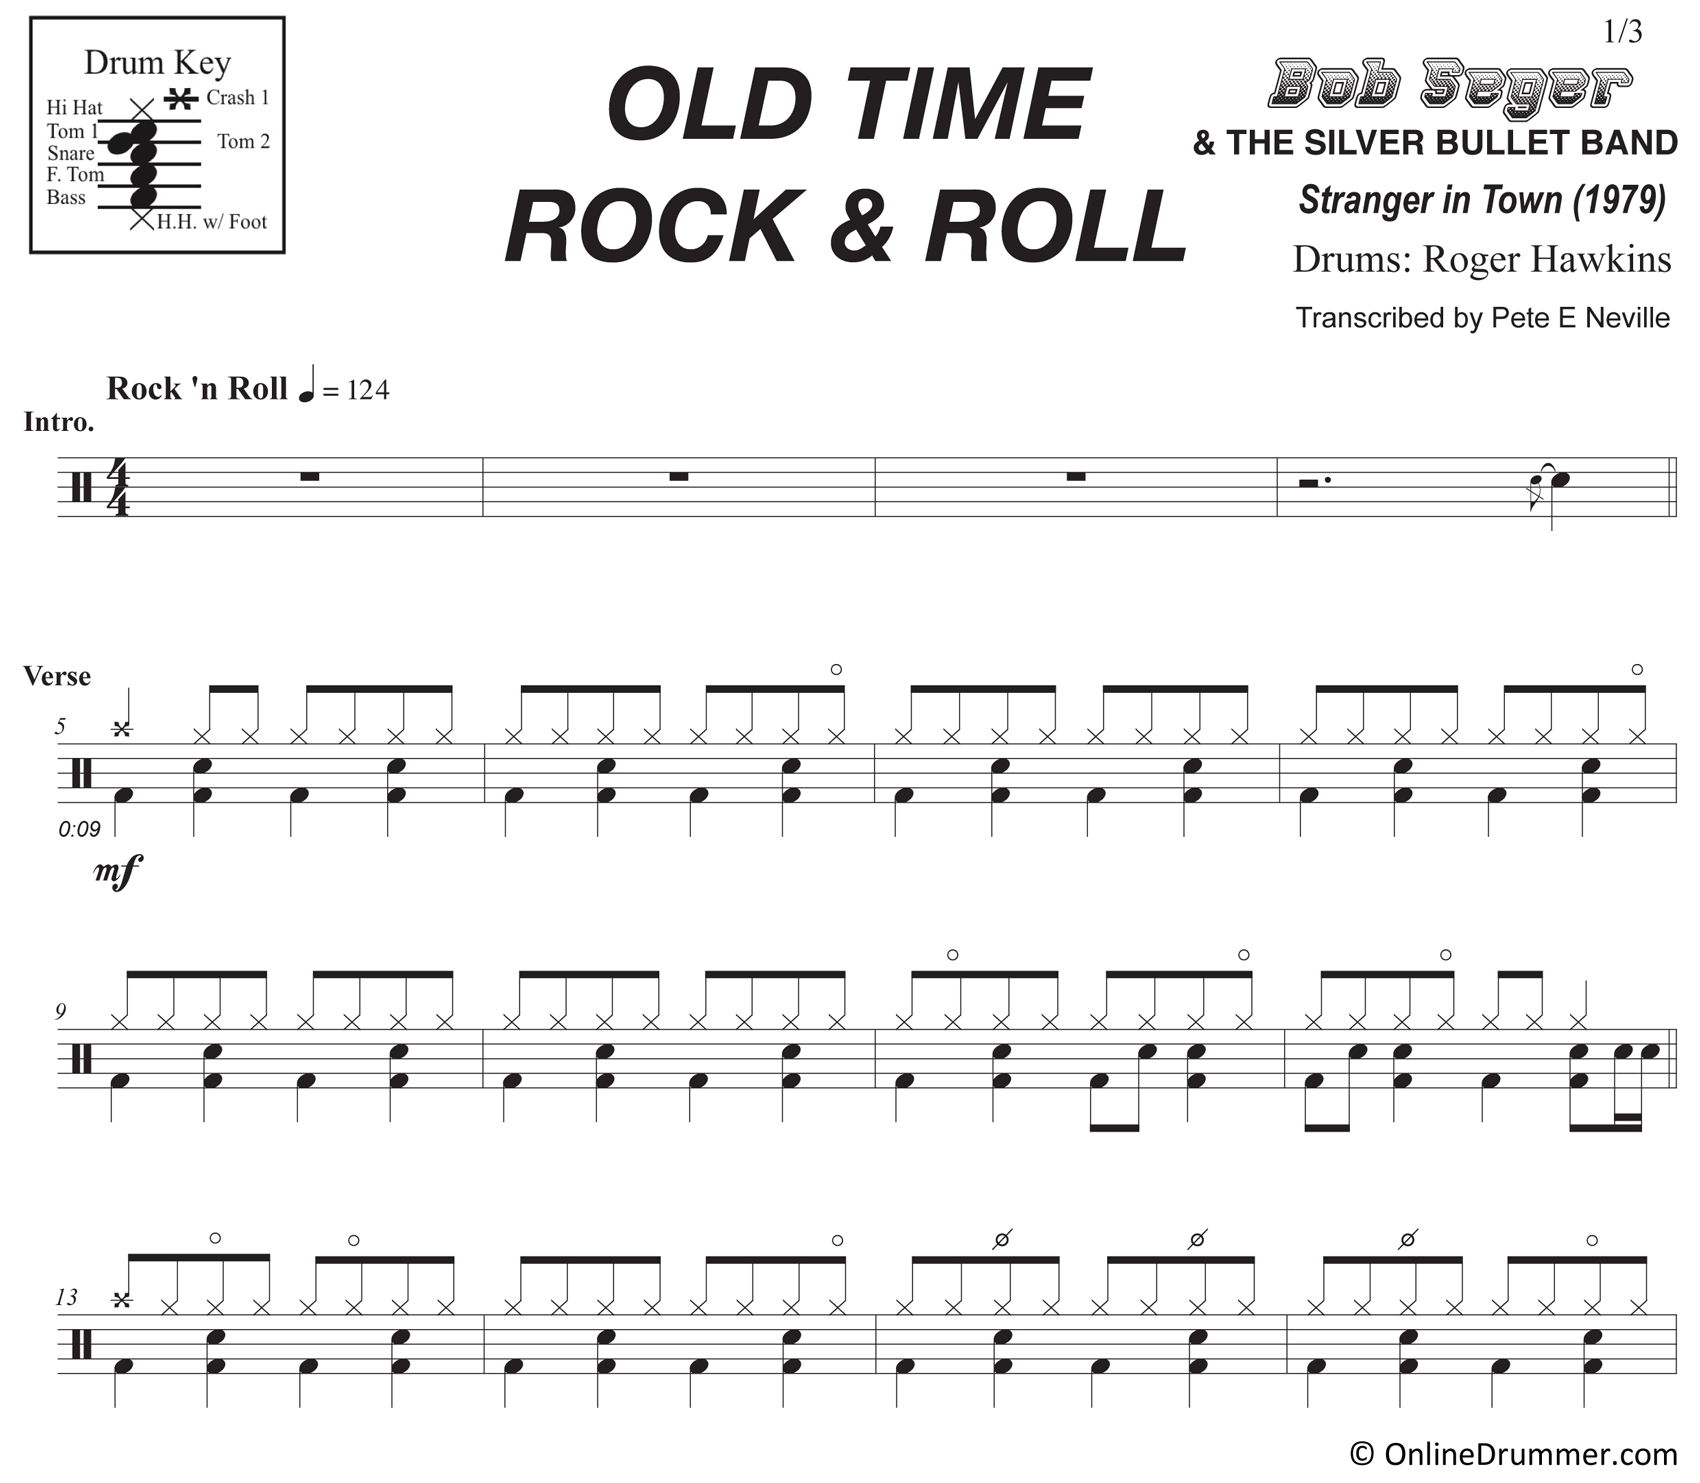 Old Time Rock & Roll - Bob Seger & The Silver Bullet Band